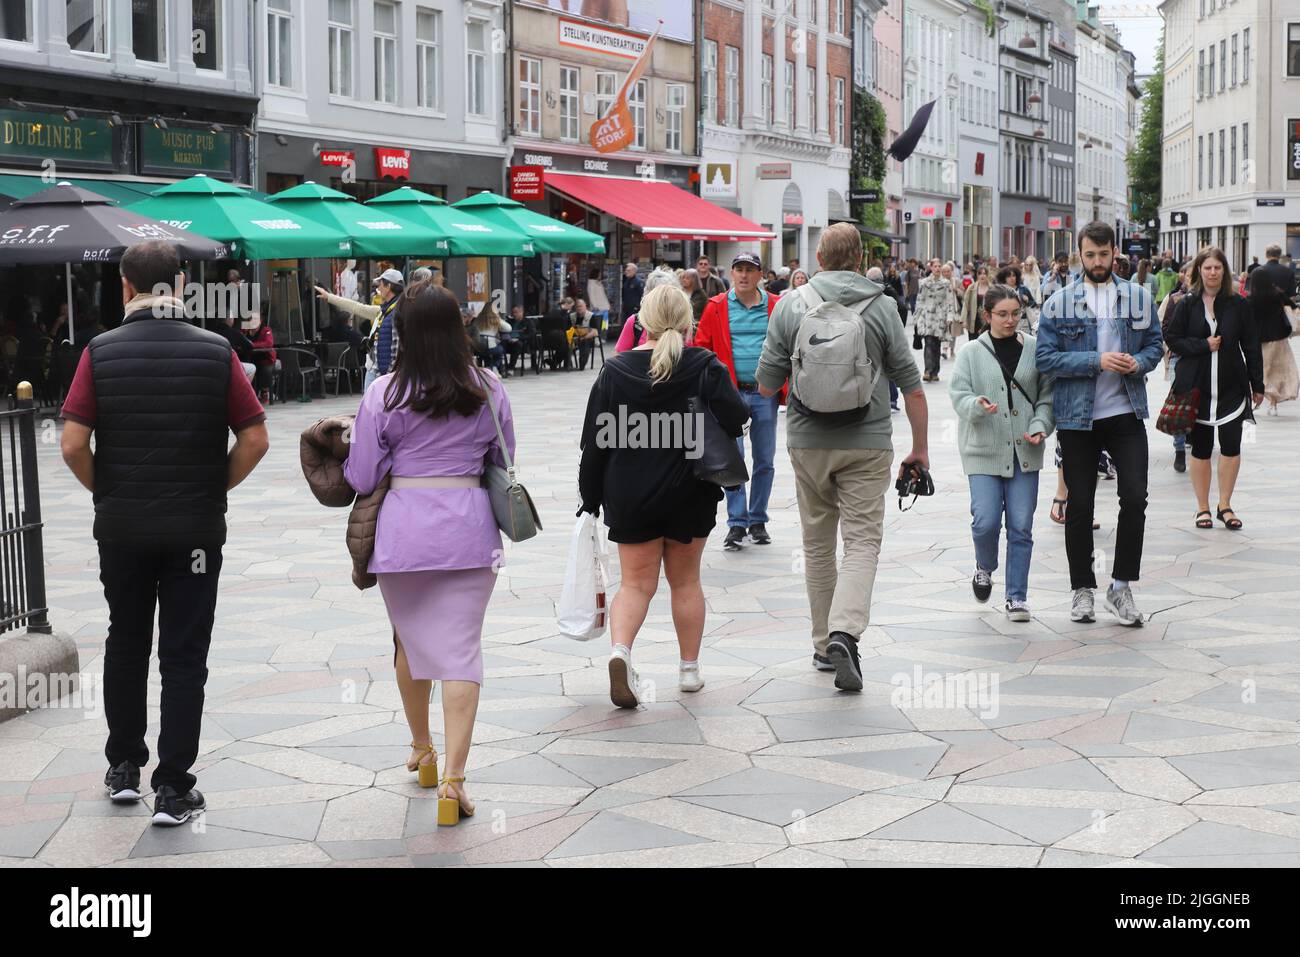 Copenhagen, Denmark - June 14, 2022: People stroilling at the Amagaertorv square at the Stroget shopping street. Stock Photo